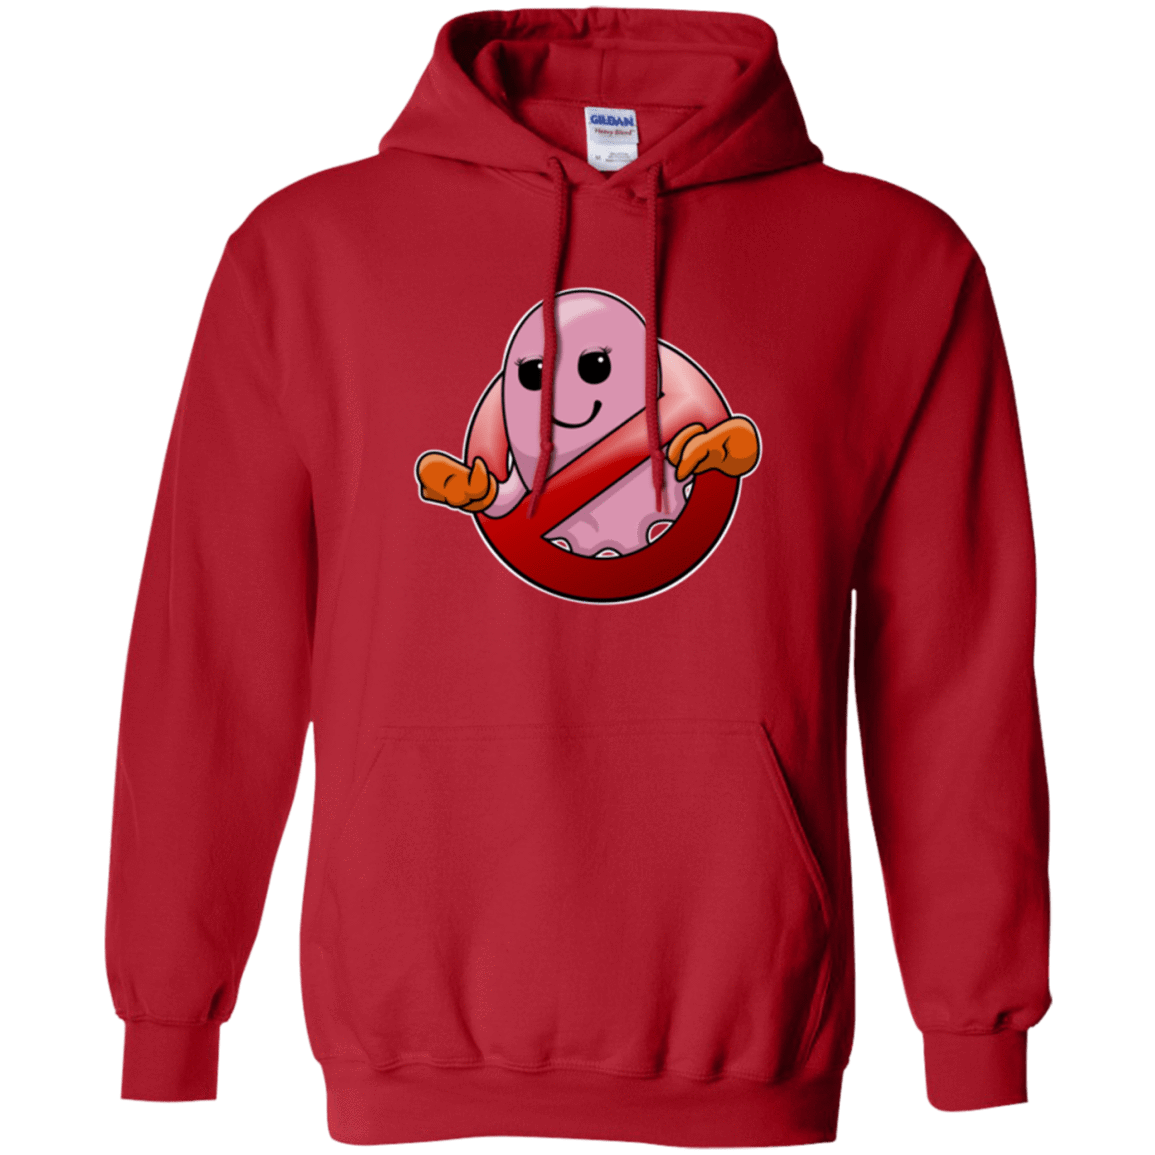 Sweatshirts Red / Small Pinky Buster Pullover Hoodie